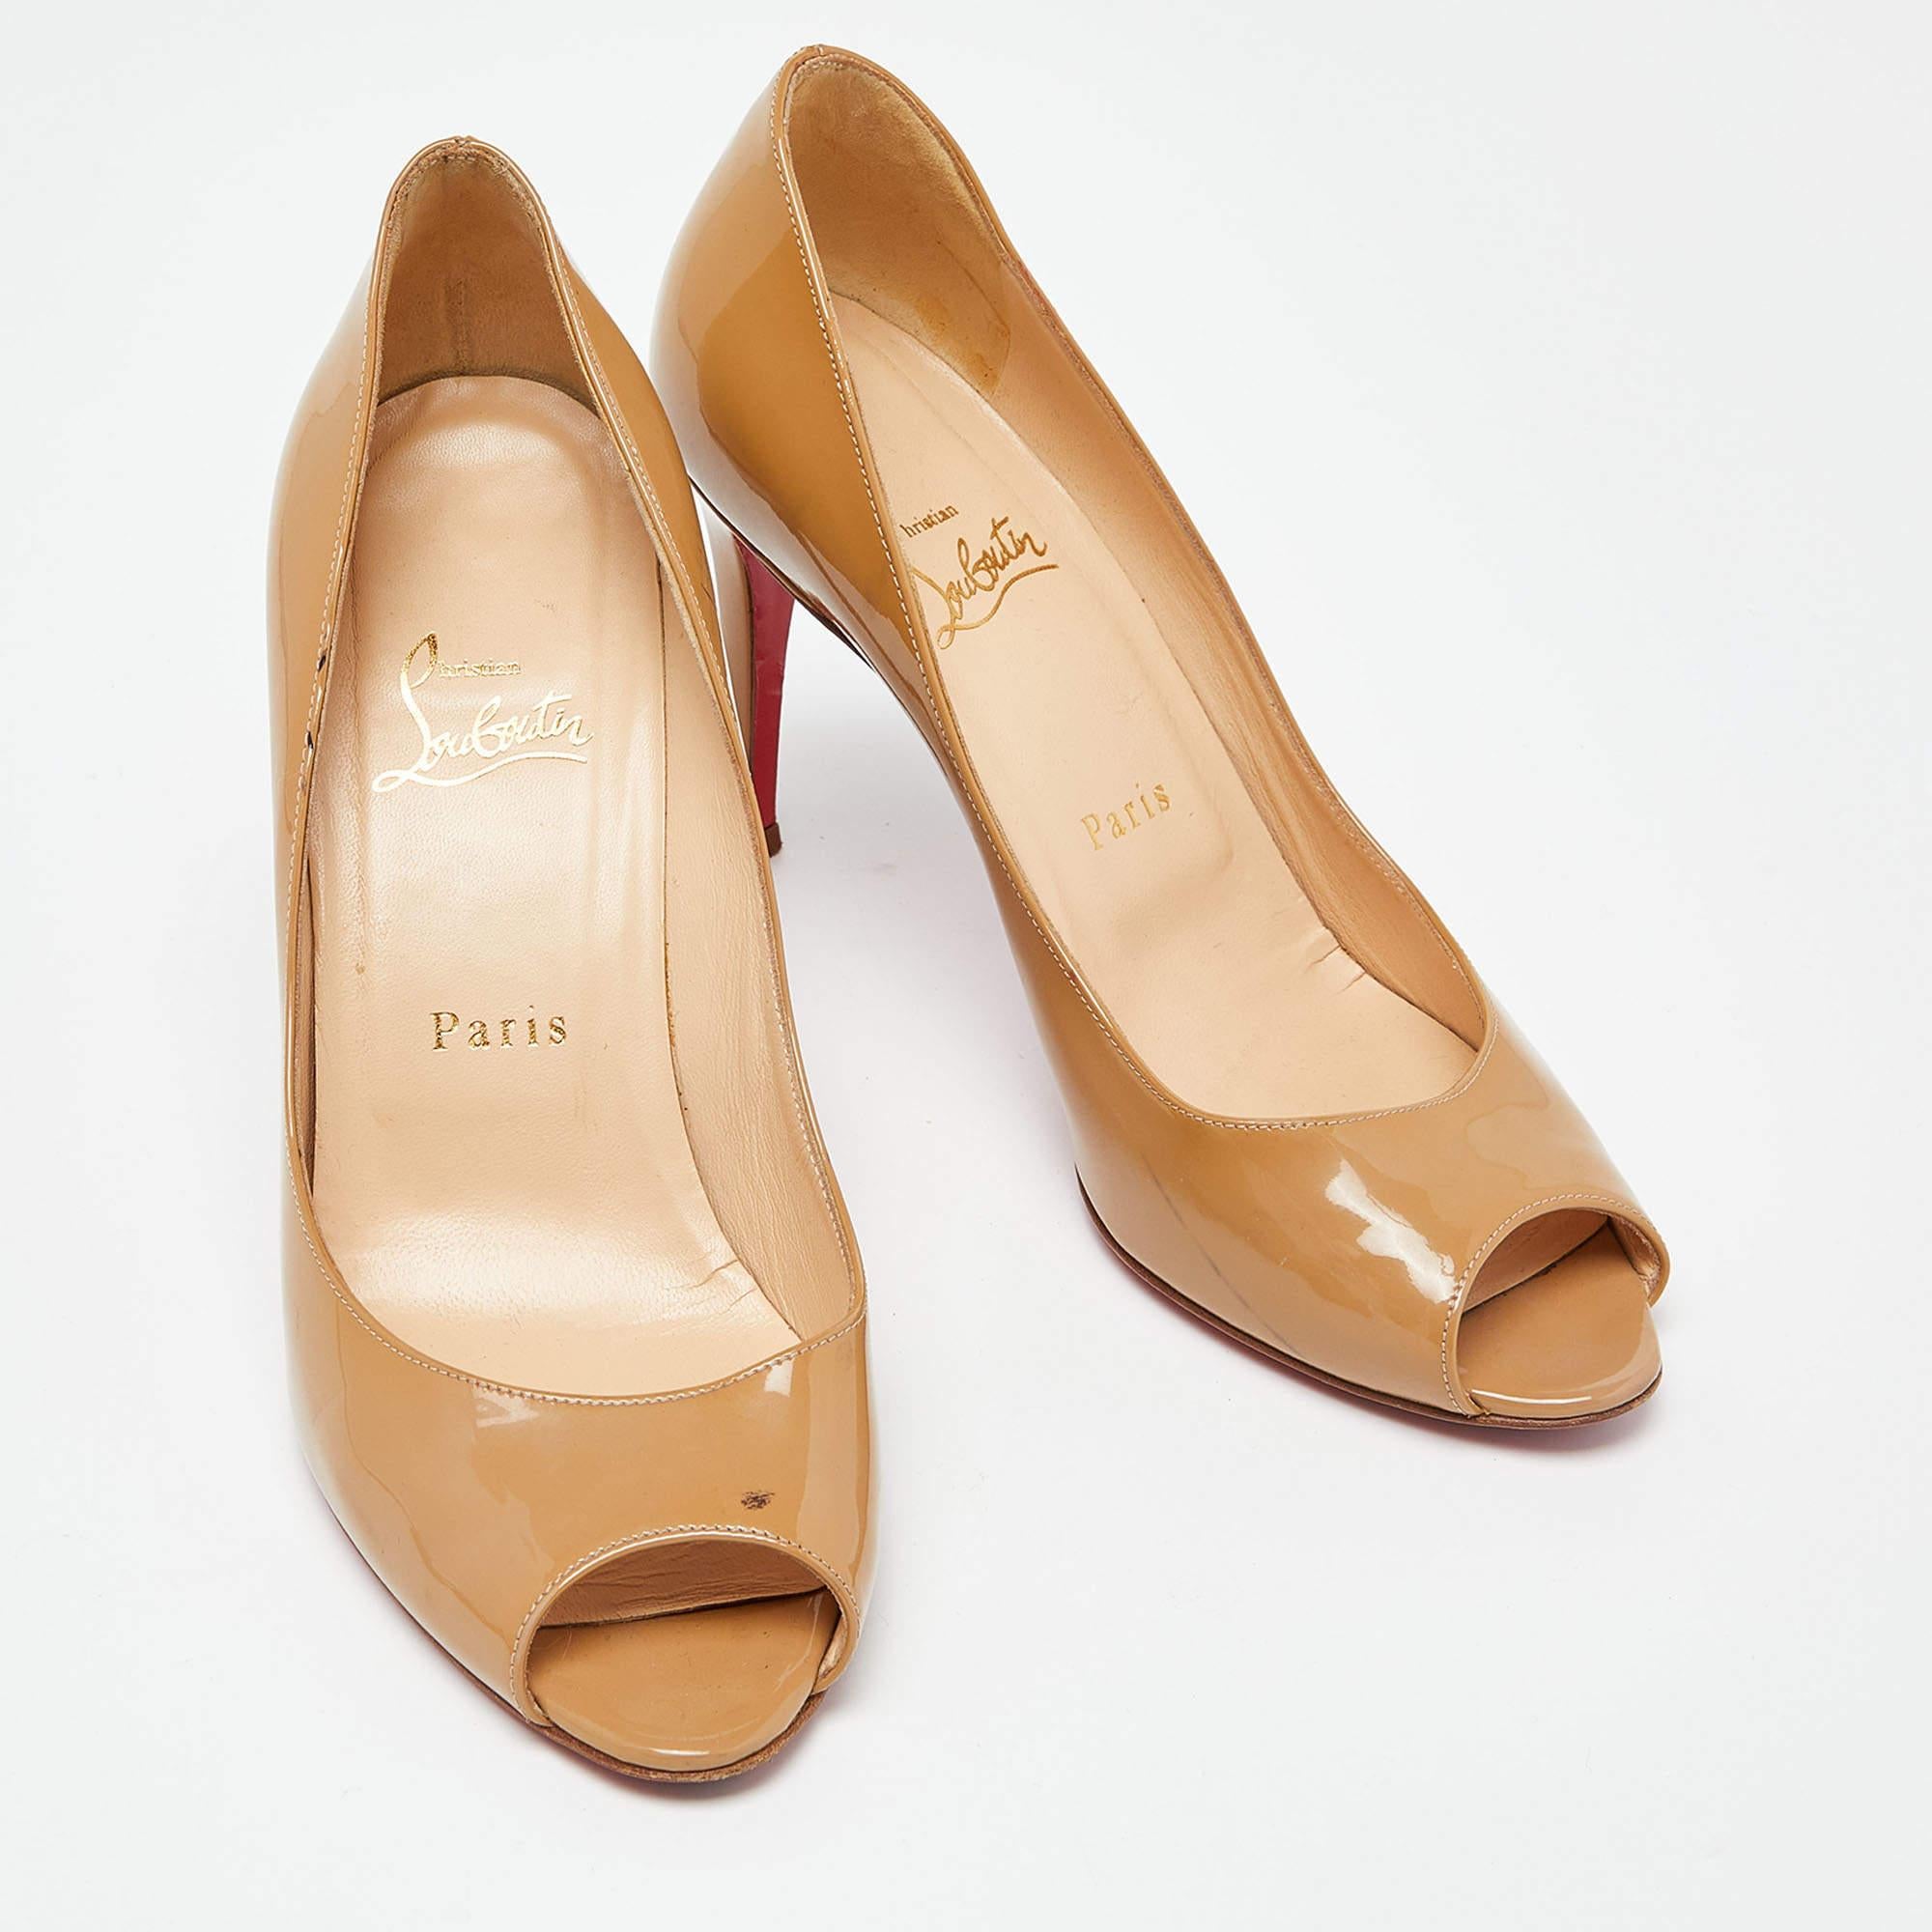 Christian Louboutin Beige Patent Leather You You Pumps Size 38 For Sale 1